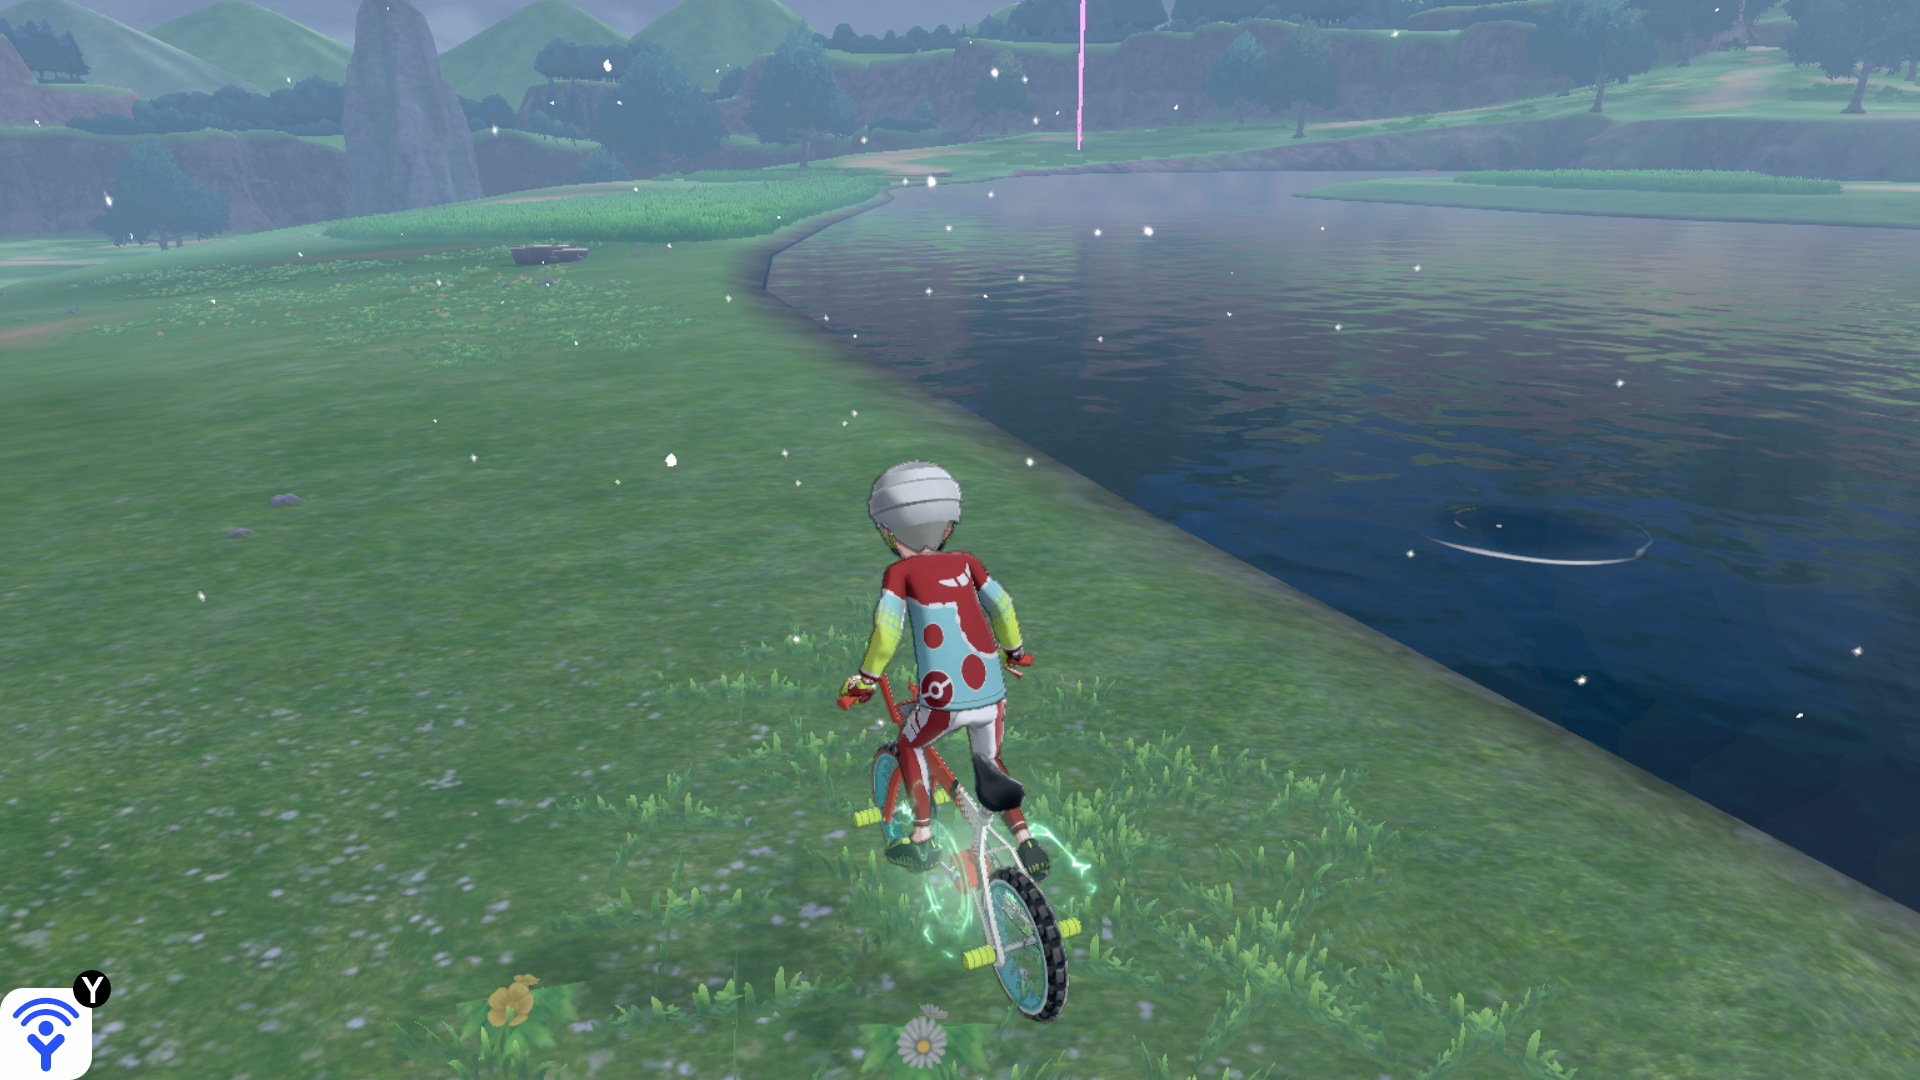 How To Increase The Speed Of The Rotom Bike In Pokemon Sword And Shield Dot Esports